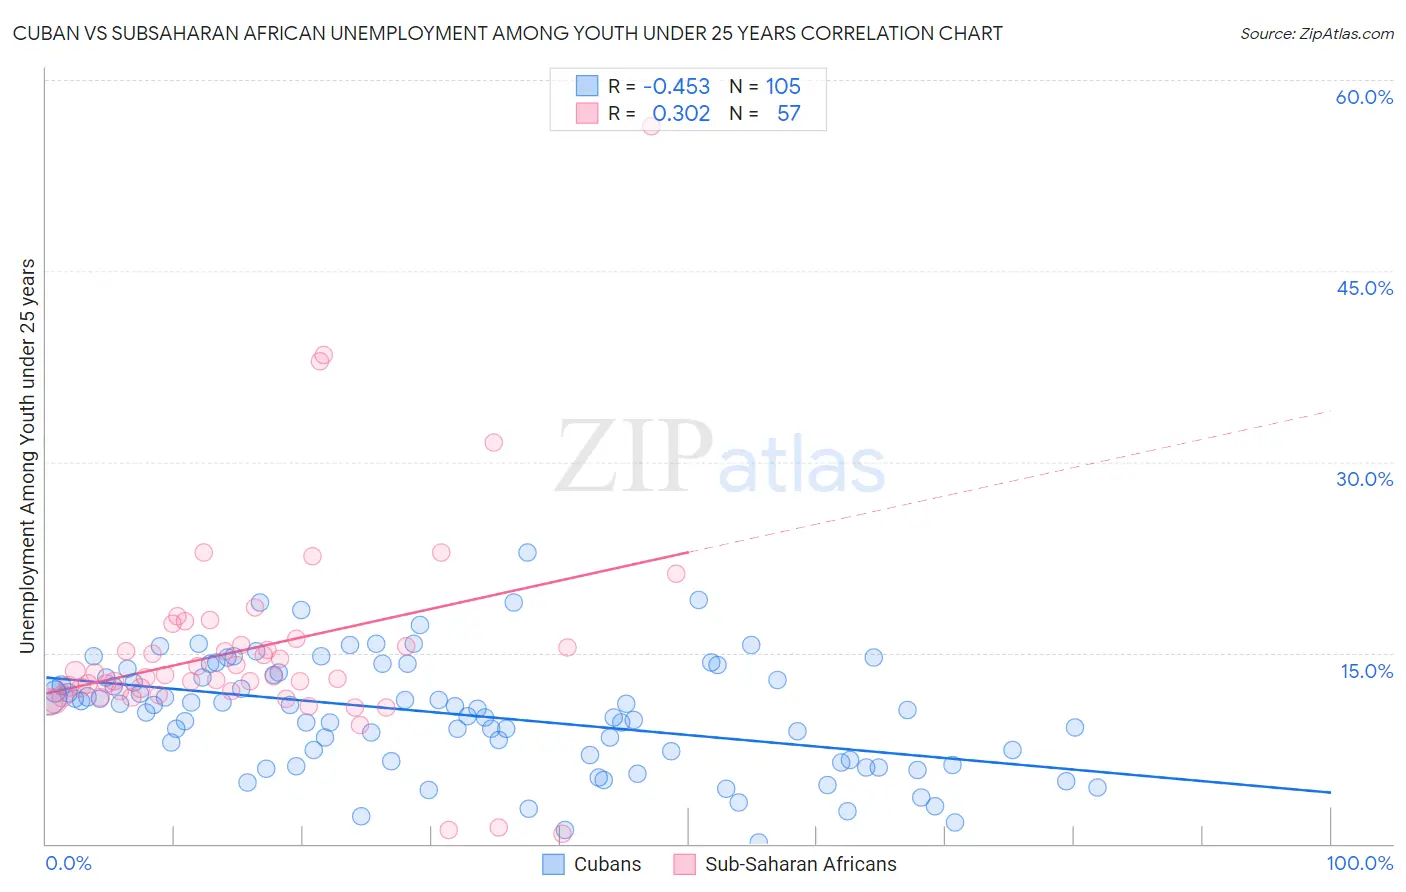 Cuban vs Subsaharan African Unemployment Among Youth under 25 years